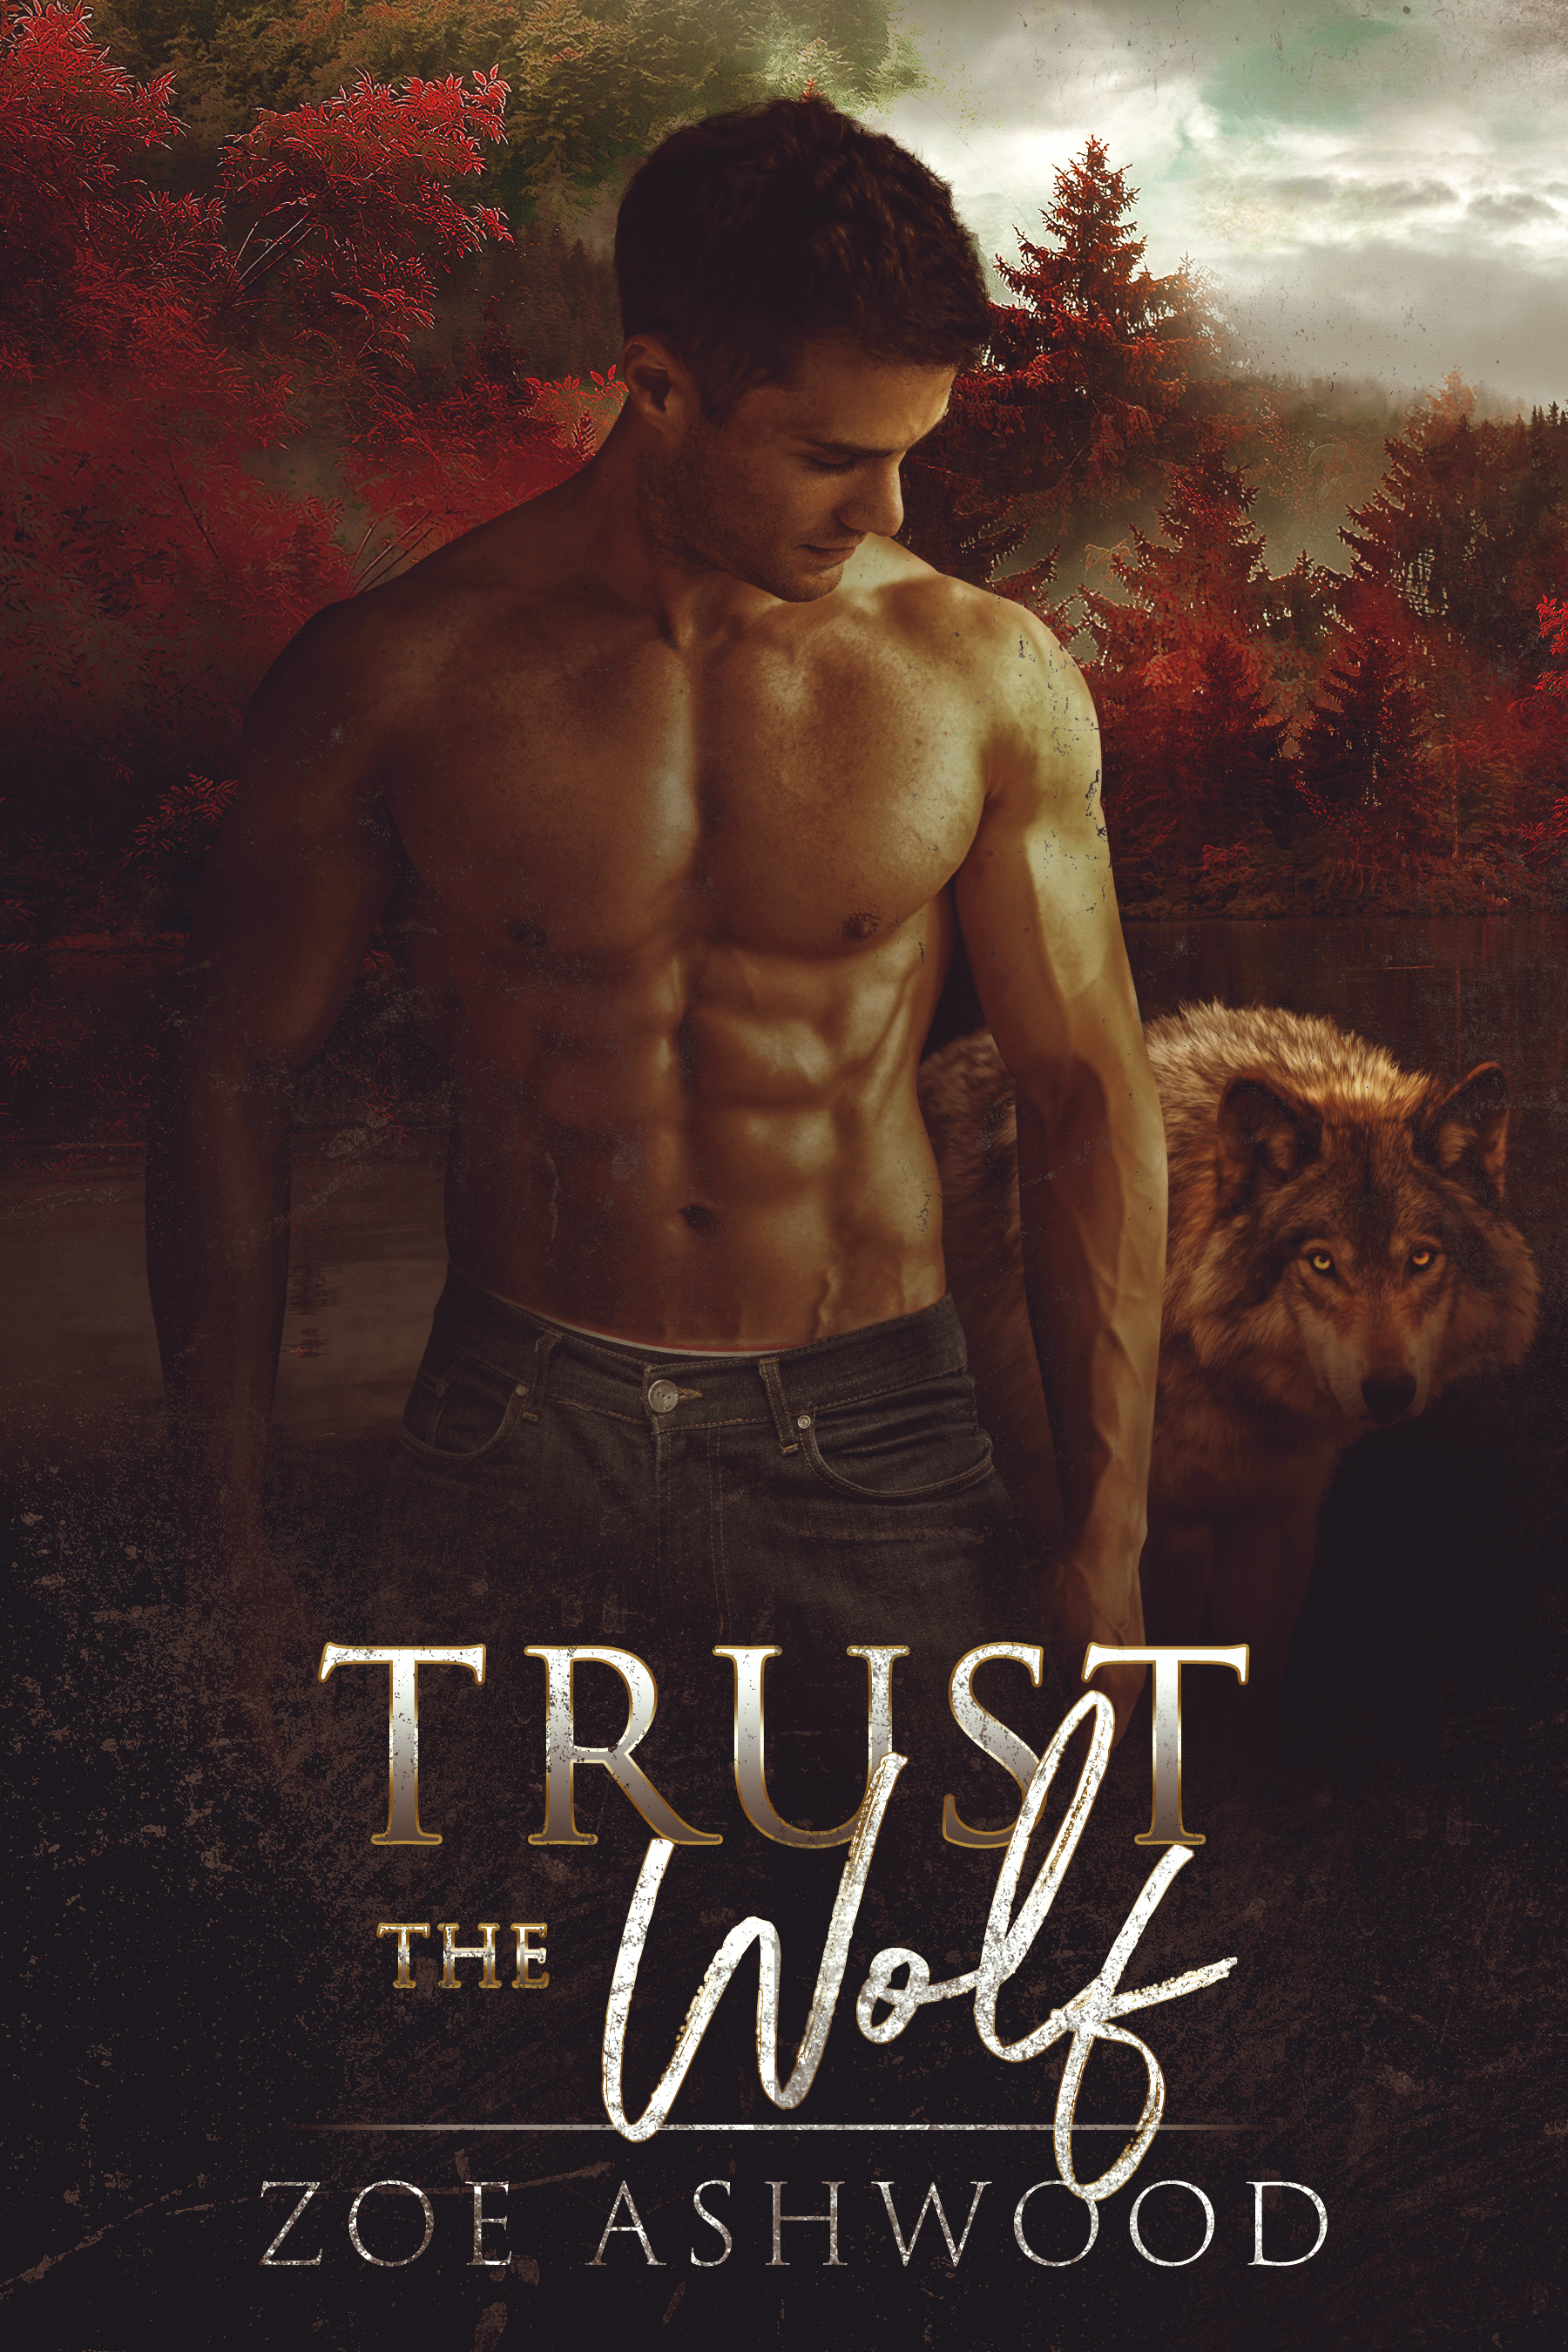 Trust the Wolf by Zoe Ashwood - a steamy paranormal shapeshifter romance